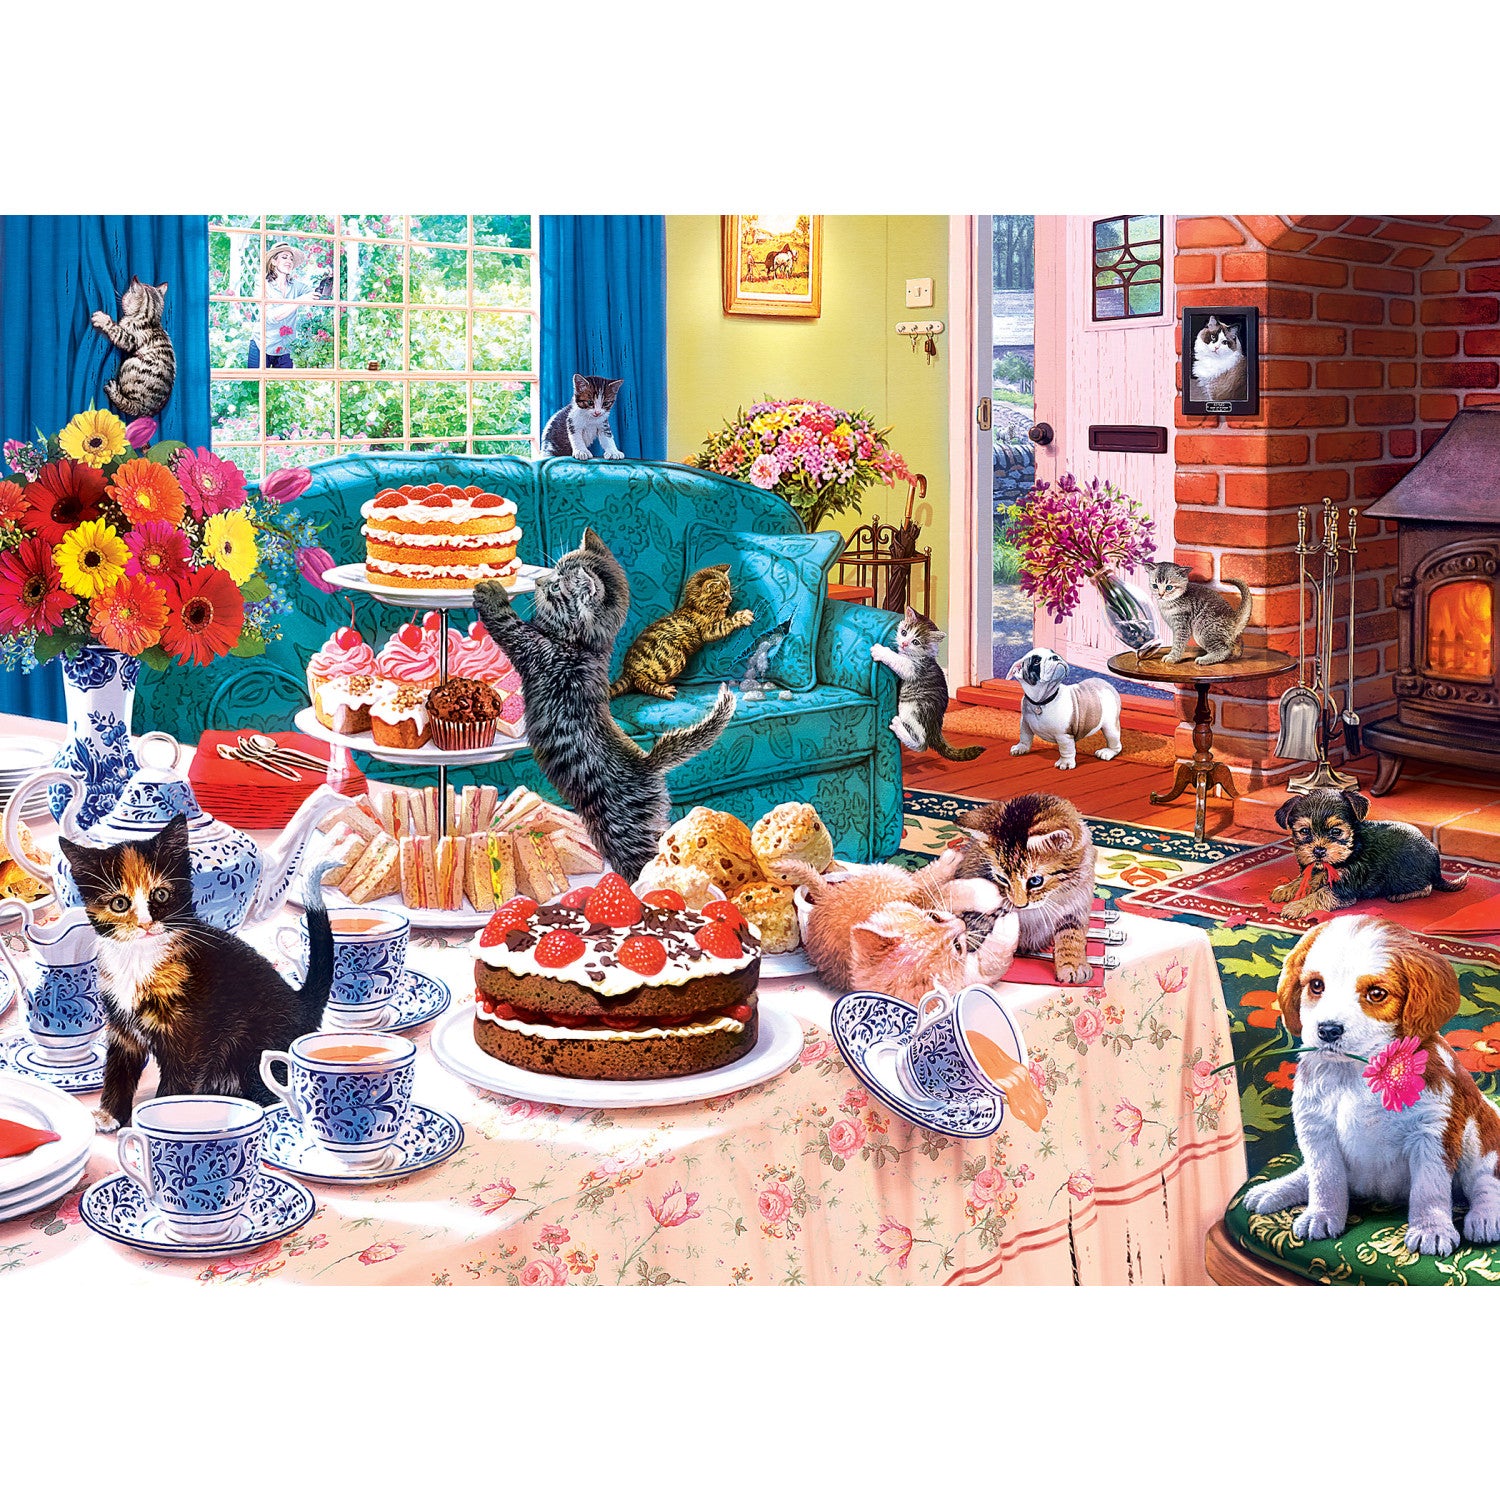 Home Sweet Home - Tea Time Terrors 500 Piece Puzzle